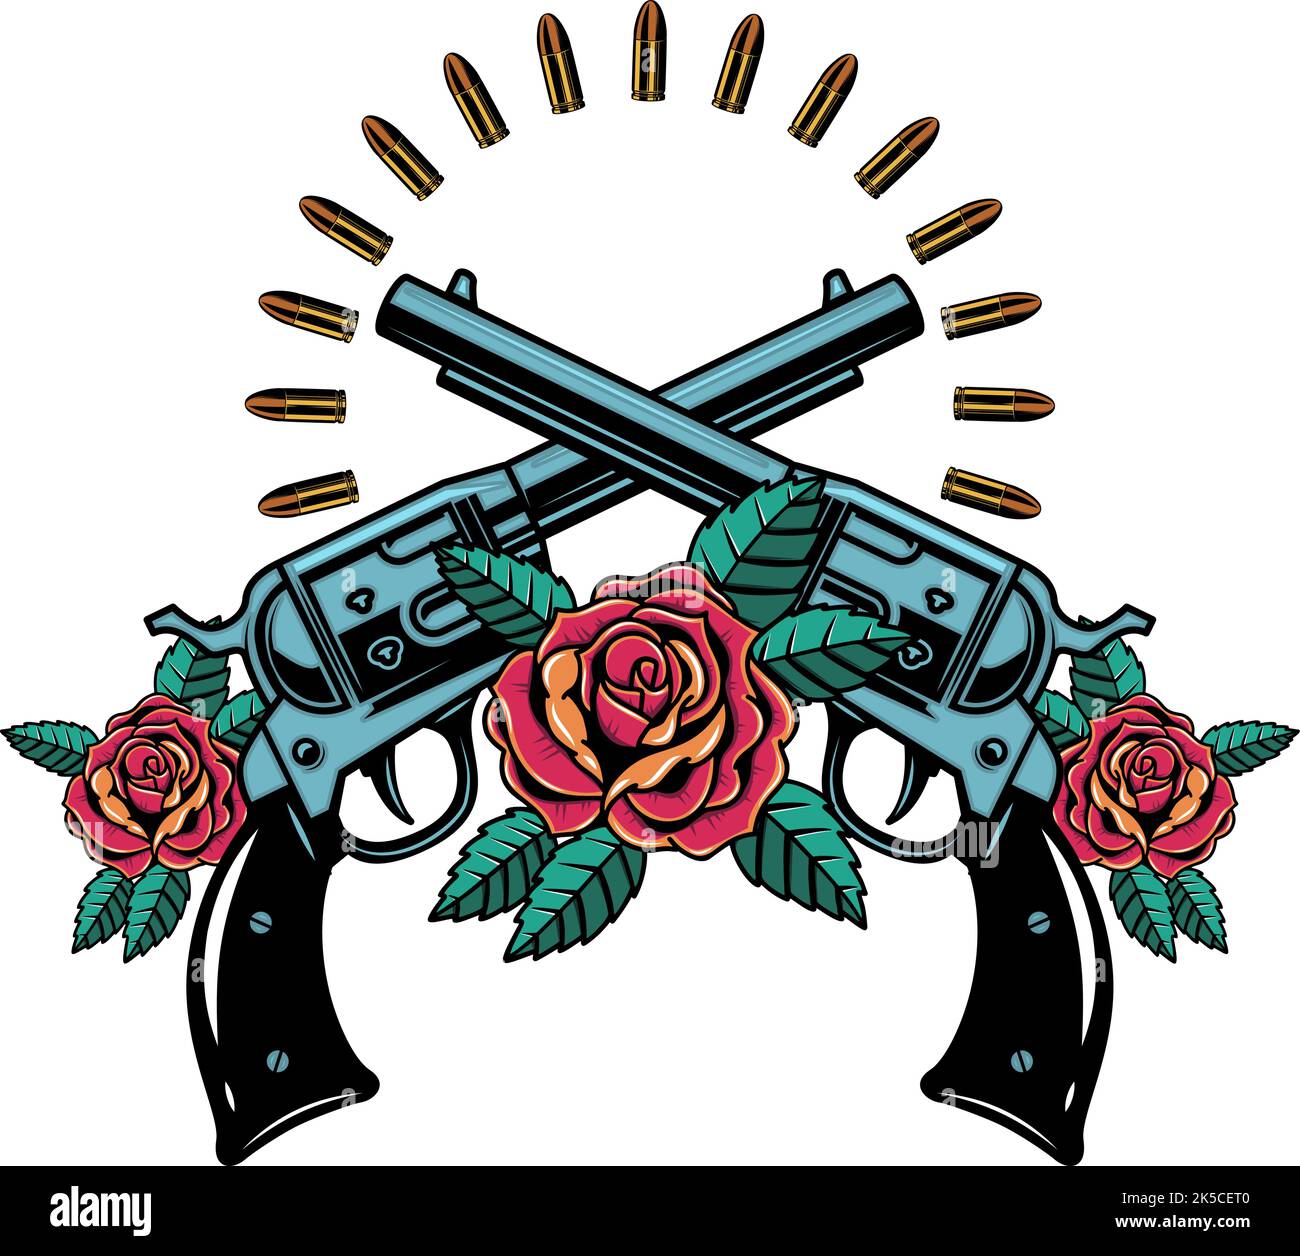 Guns and roses Cut Out Stock Images & Pictures - Alamy